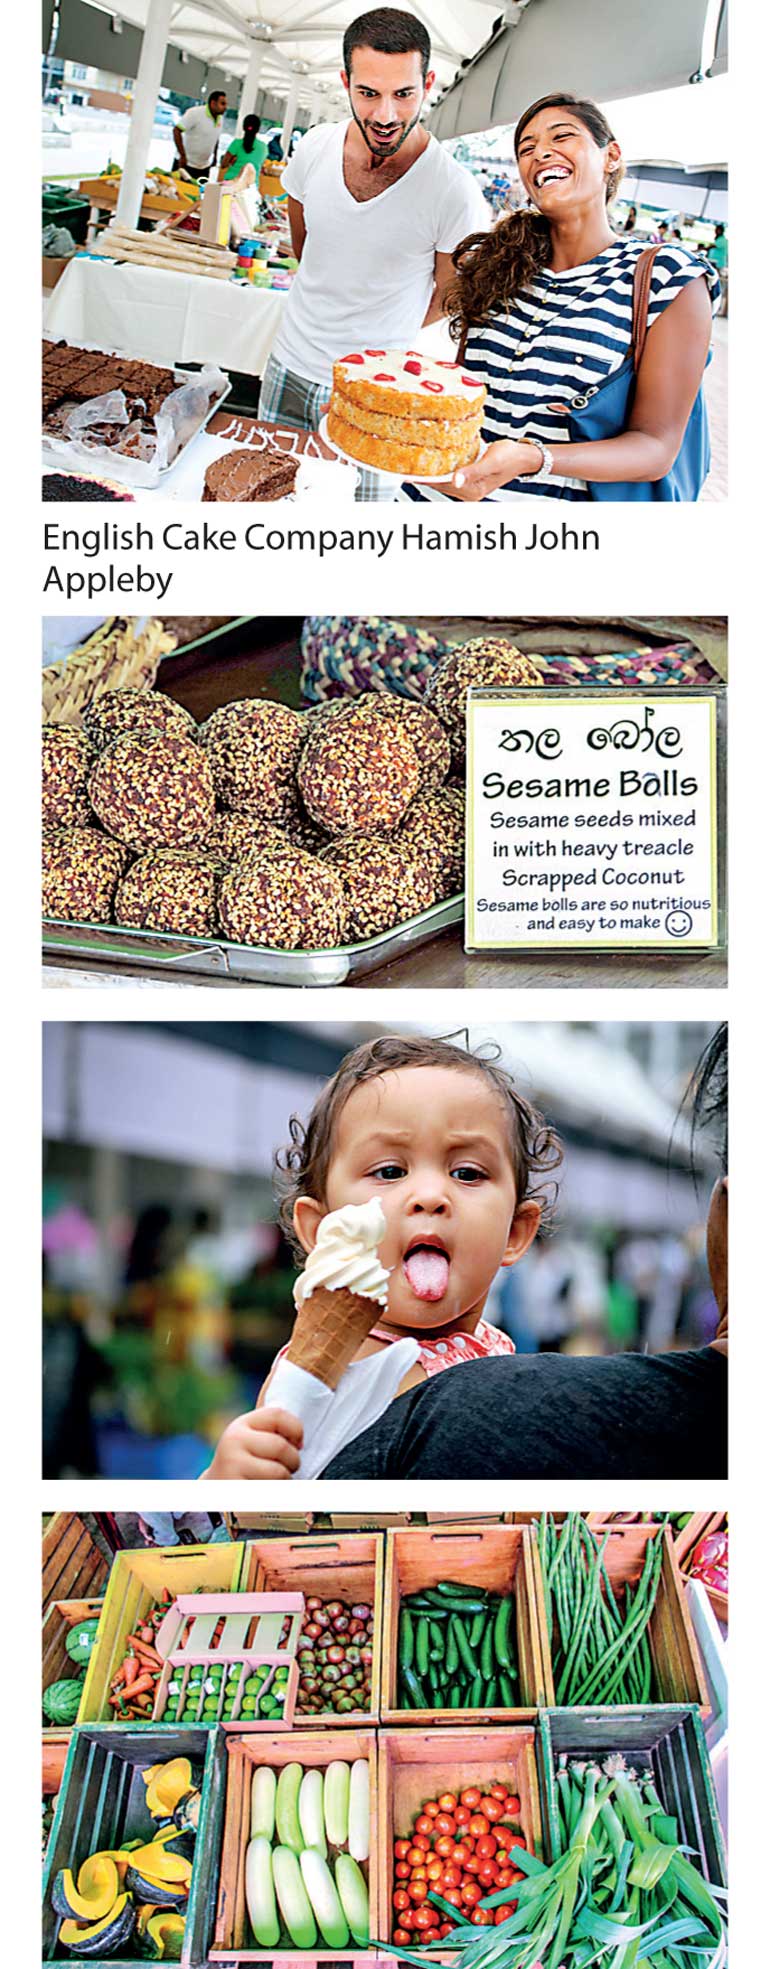 Good Market to host a oneday Good Market event in Kandy Daily FT